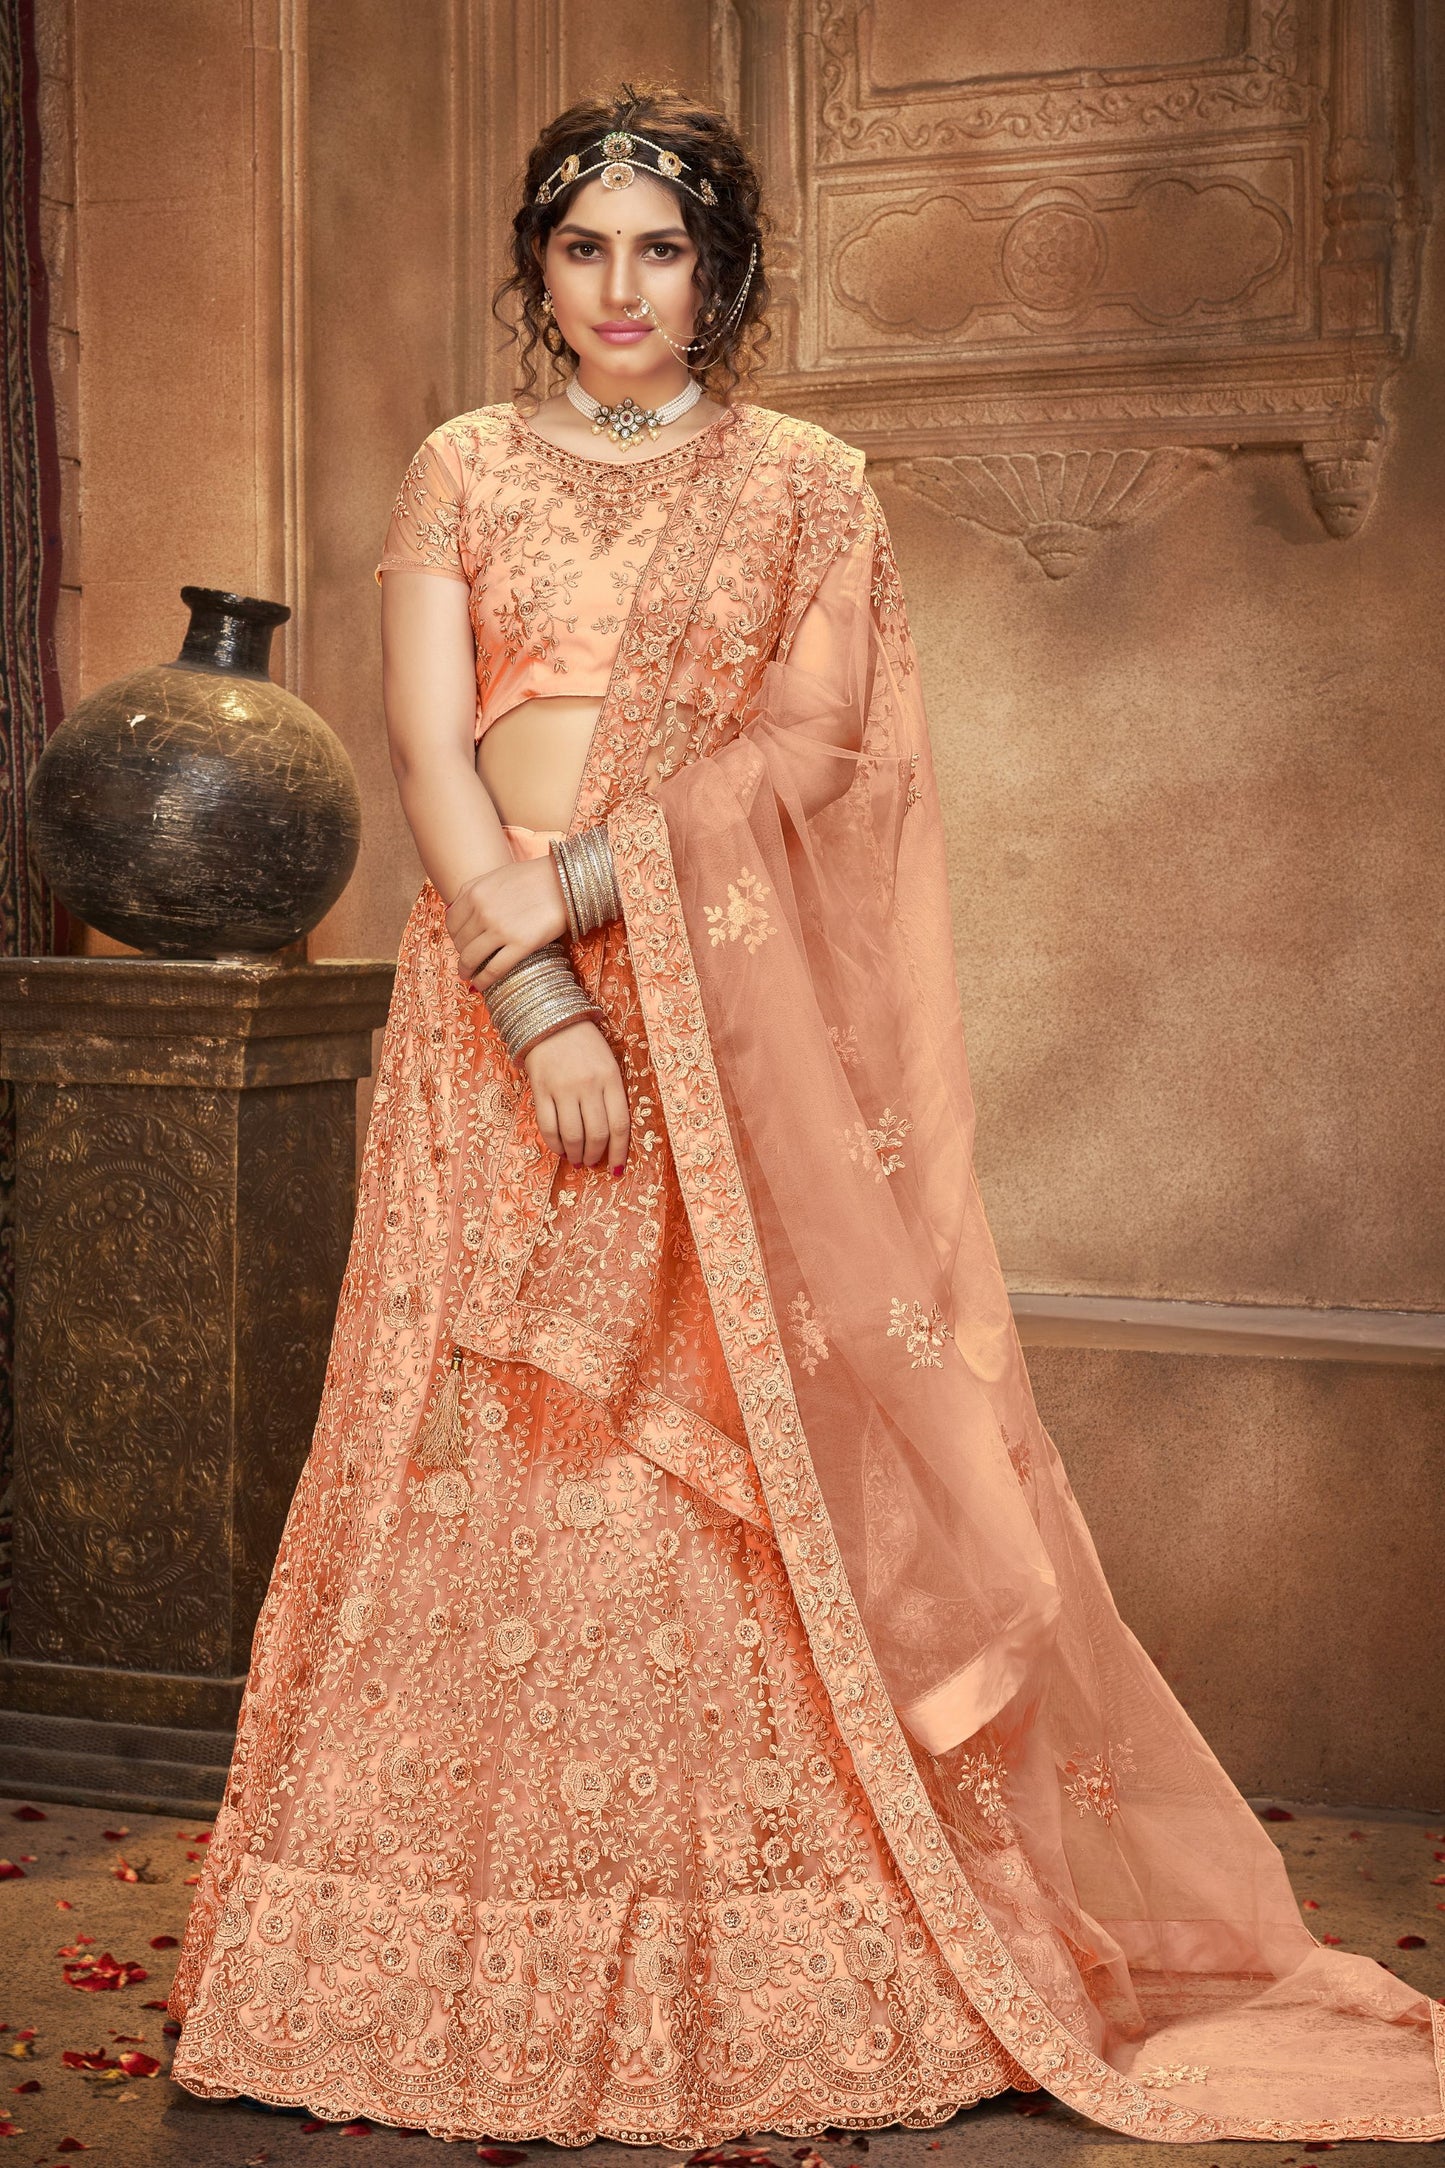 Coral Color Pakistani Net Lehenga Choli For Indian Festivals & Weddings - Sequence Embroidery Work, Thread Embroidery Work,